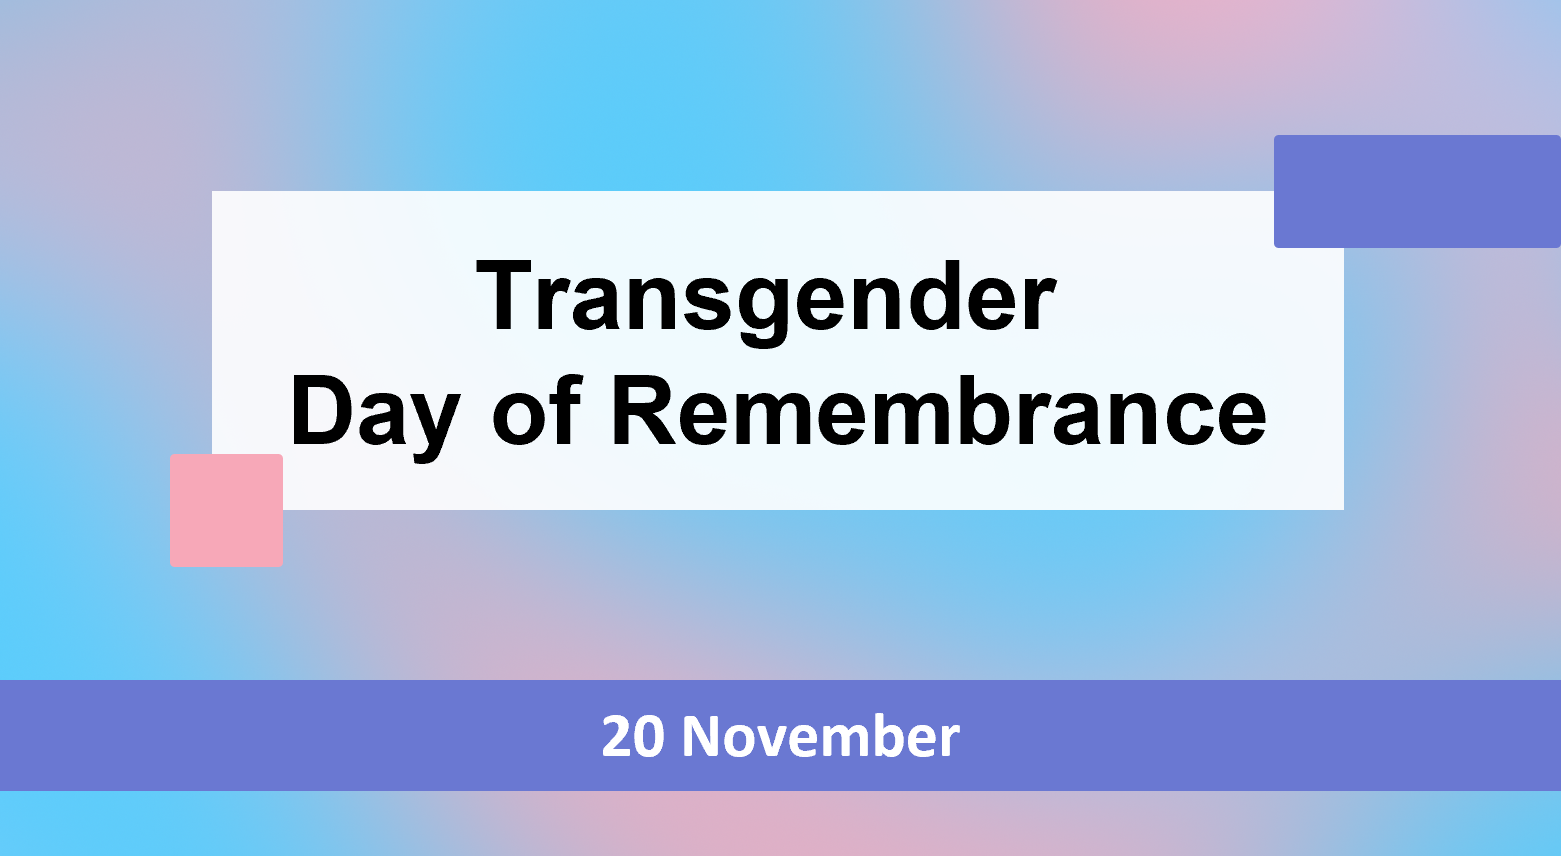 Trans flag gradient showing "trans day of remembrance" 